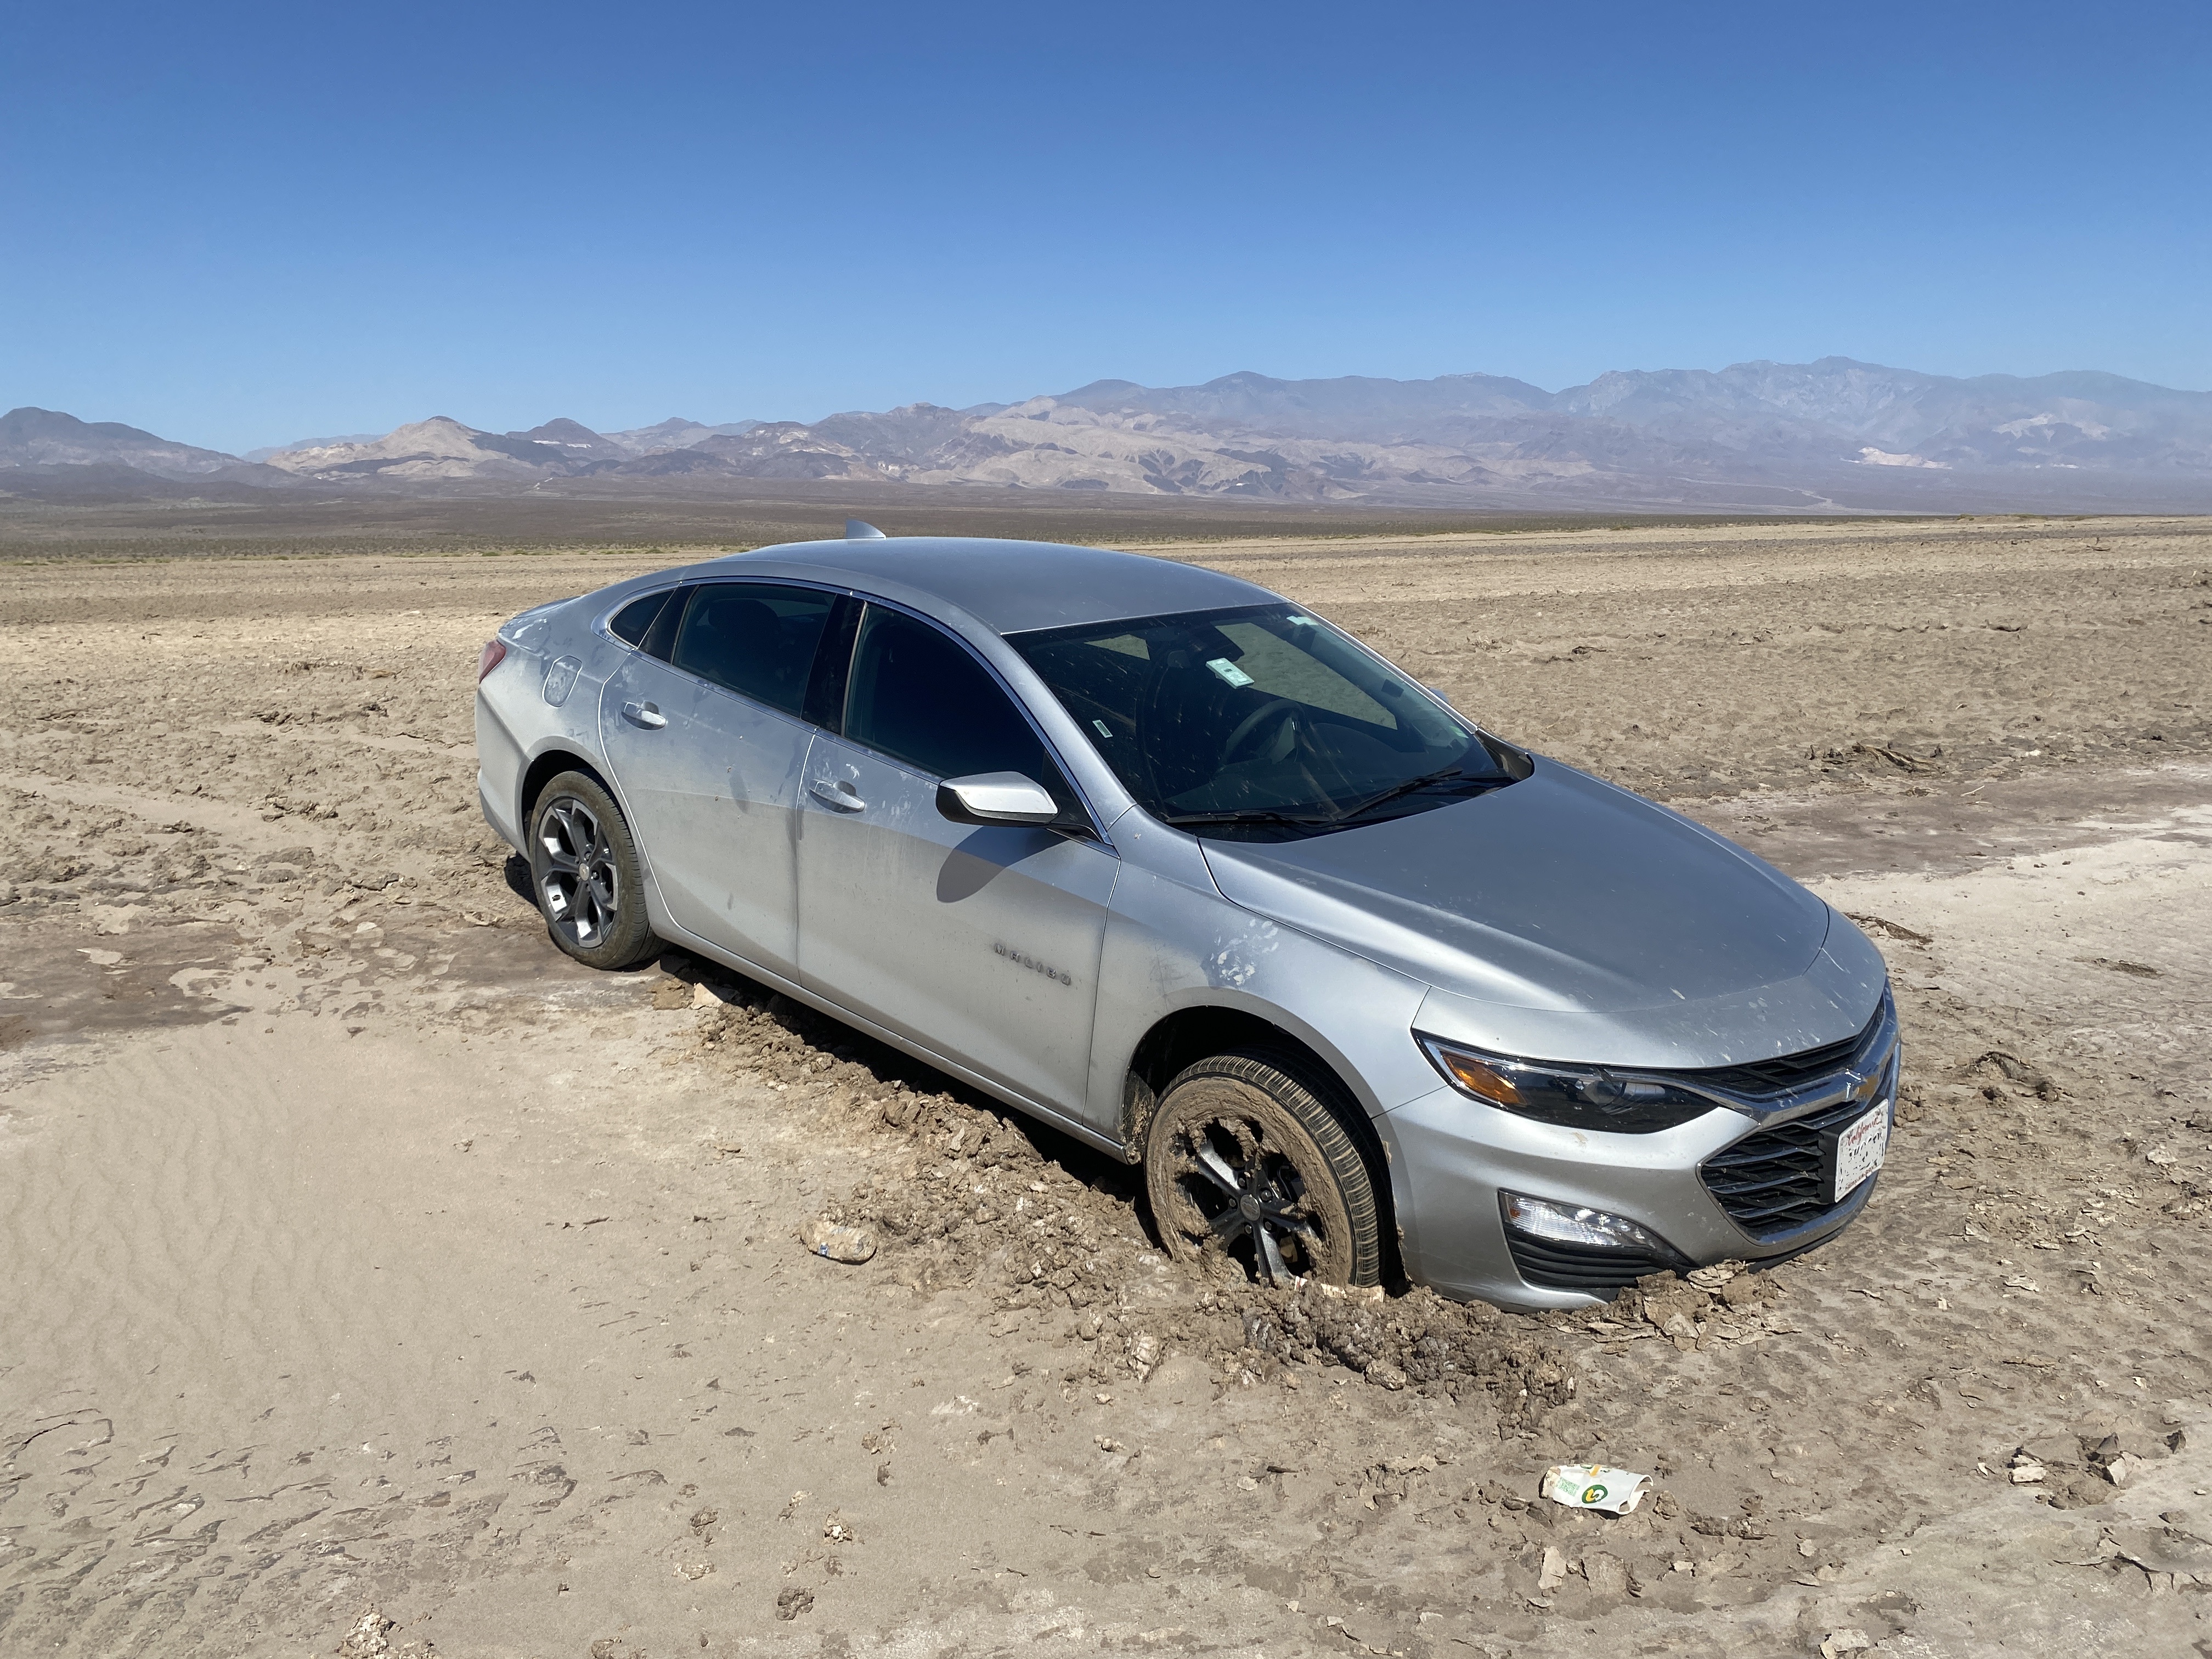 A gray car has a front tire sunk into mud. It is in a wide, flat open area with no road in sight.